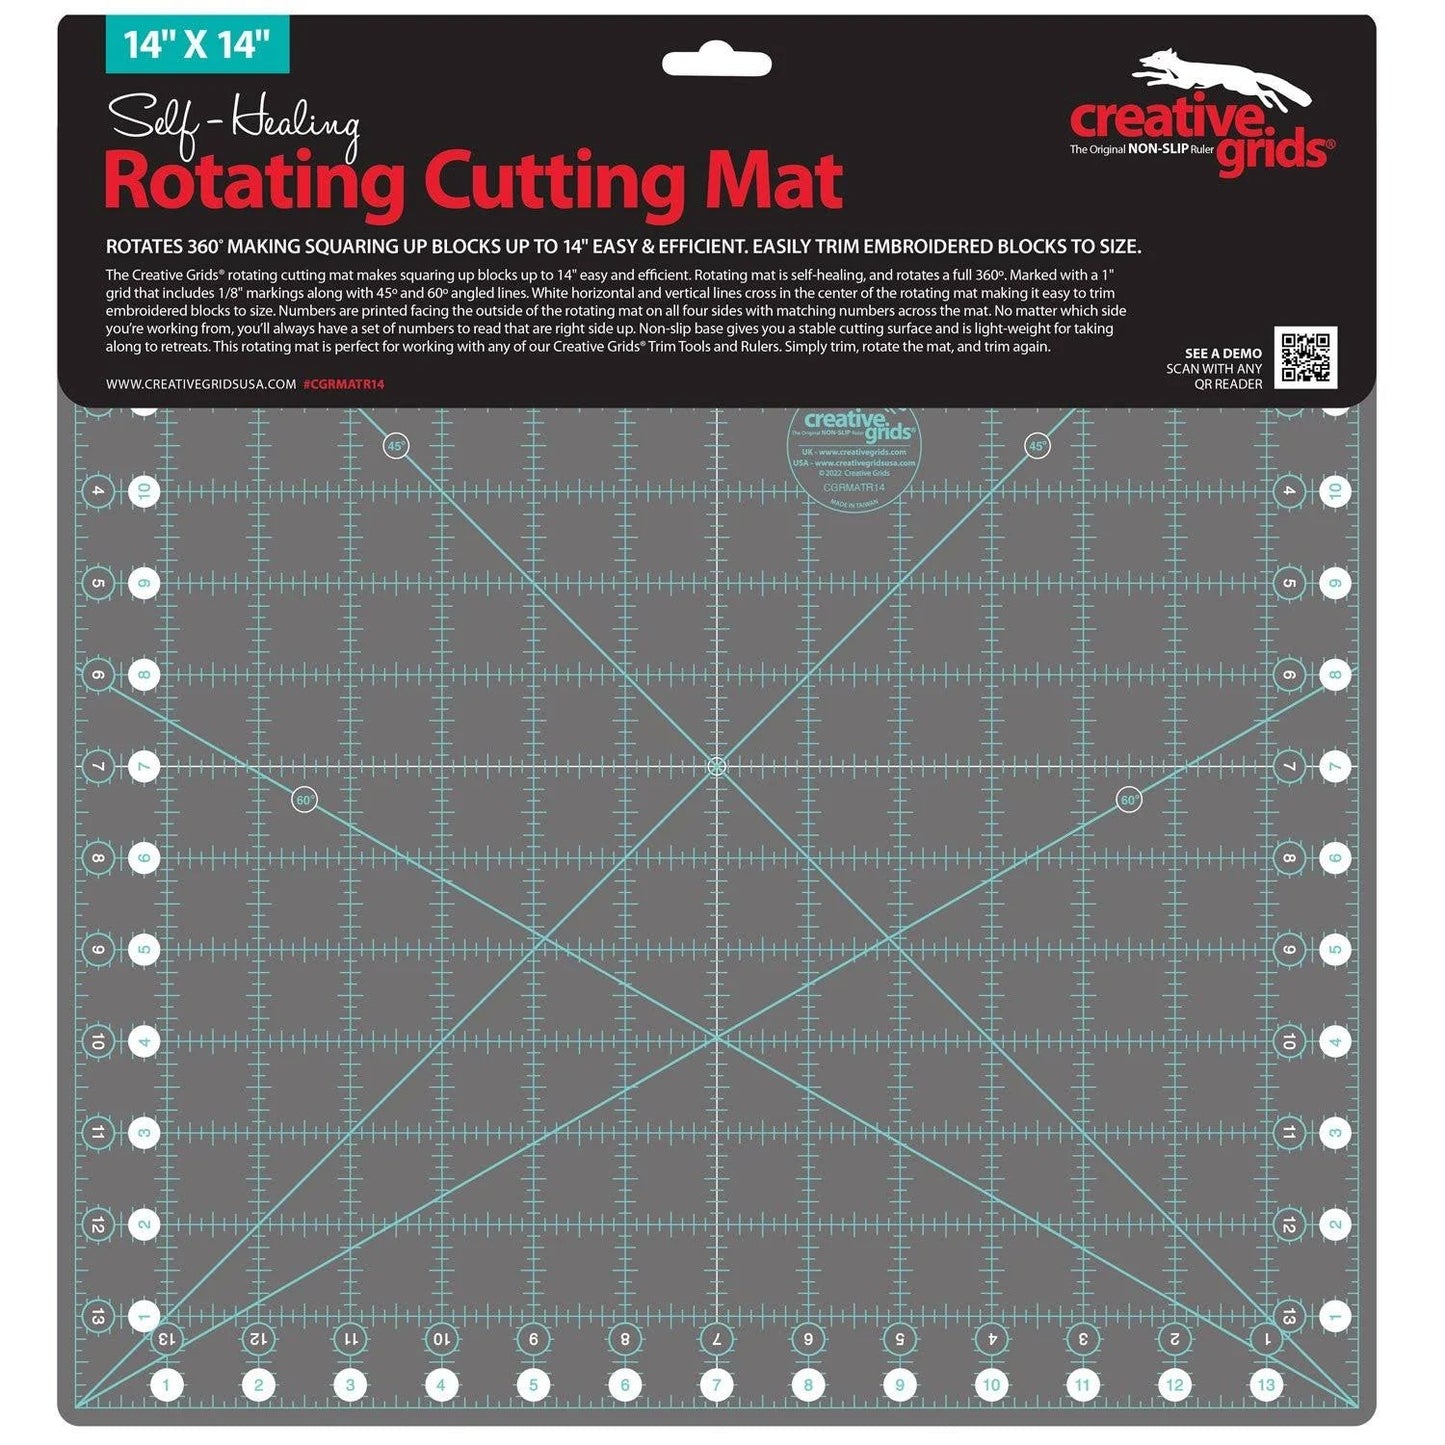 Rotating Cutting Mat by Creative Grids